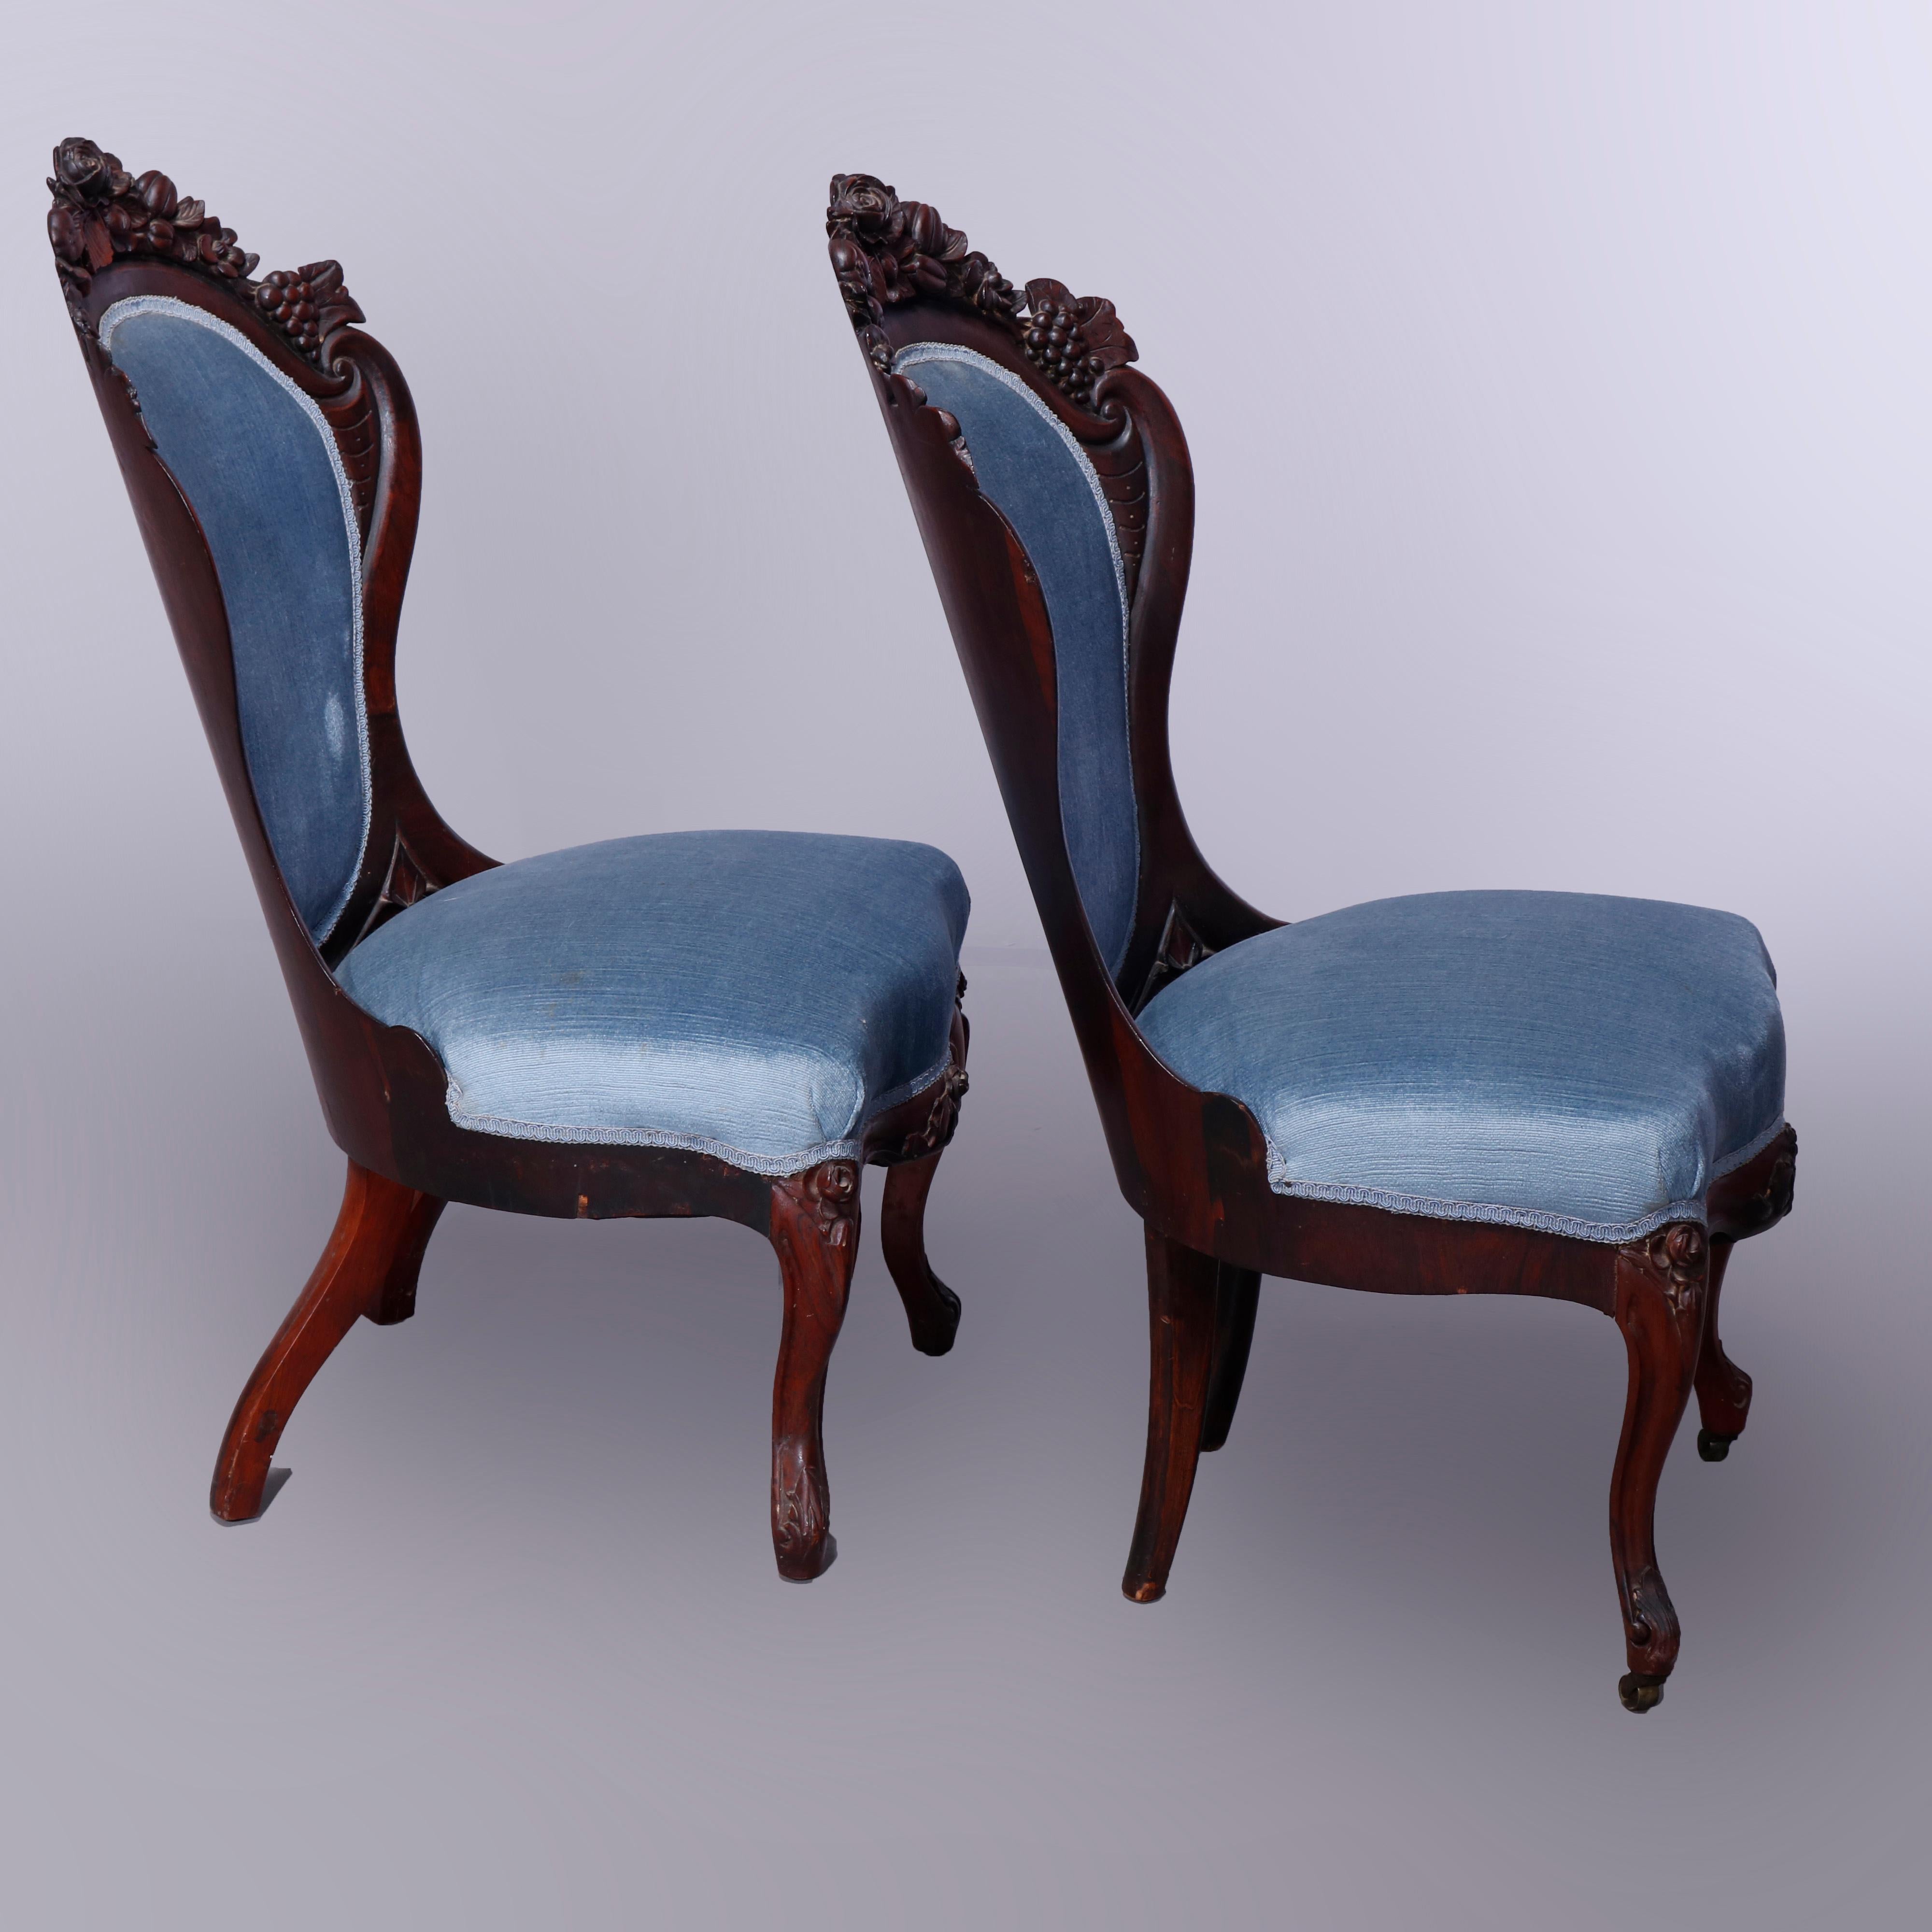 Carved Pair Rococo Revival Belter Rosalie Laminated Rosewood Side Chairs, c1860